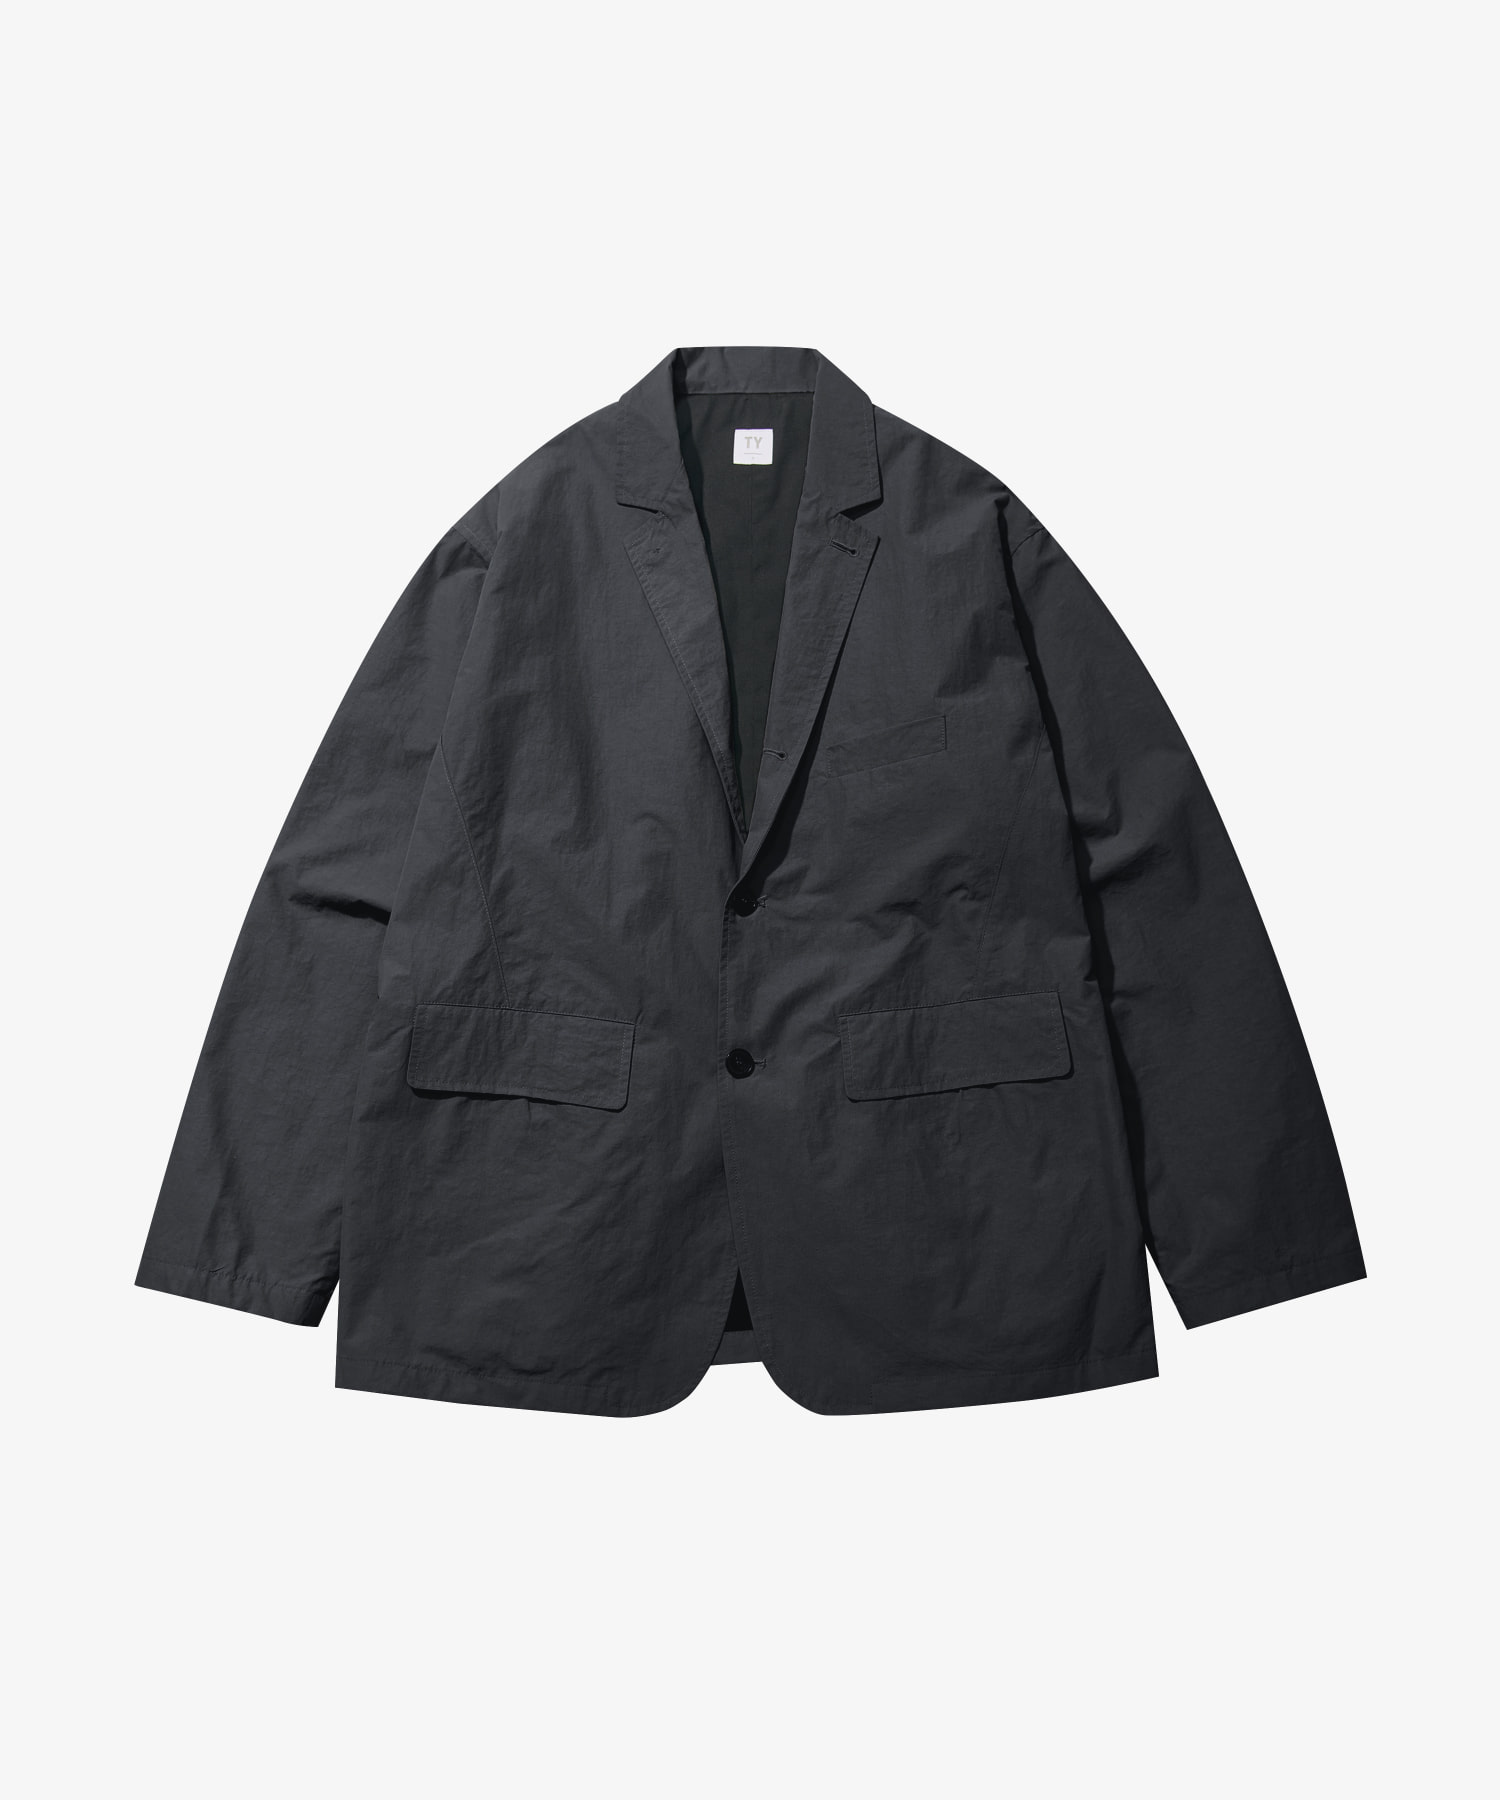 Office casual sports jacket_Charcoal